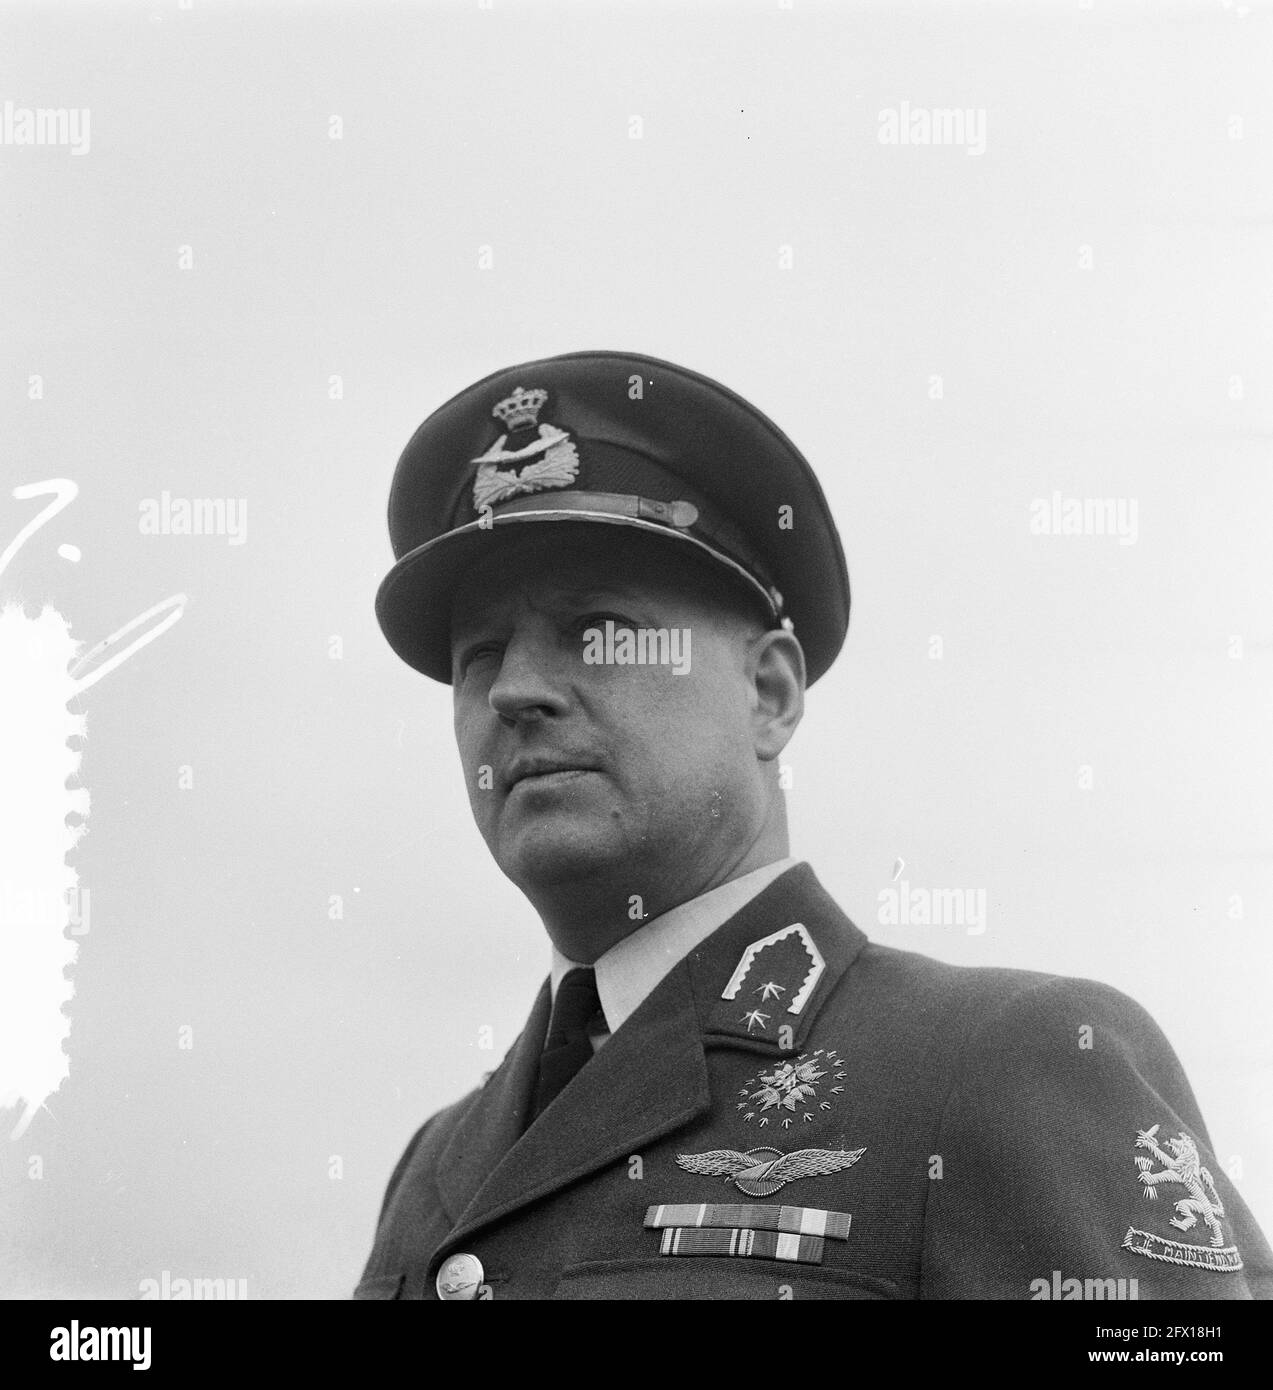 Commander kite J. H. van Giessen, Major General kite, October 1, 1953, generals, air force, portraits, The Netherlands, 20th century press agency photo, news to remember, documentary, historic photography 1945-1990, visual stories, human history of the Twentieth Century, capturing moments in time Stock Photo